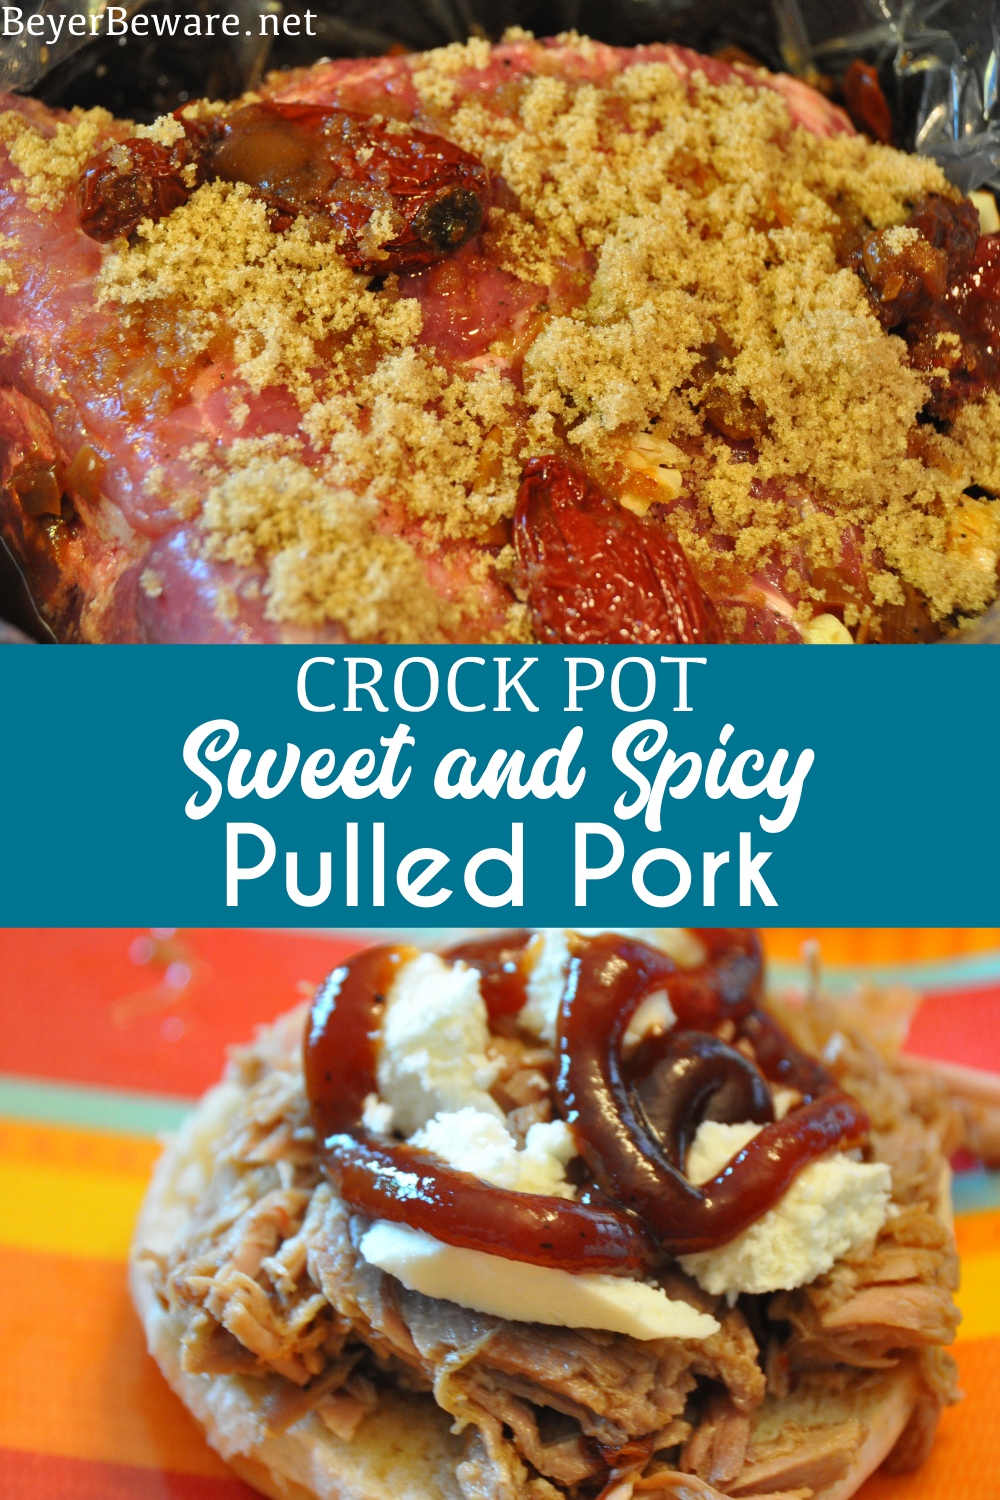 Crock Pot Dr. Pepper Pulled Pork is a sweet and spicy pulled pork recipe made with Dr. Pepper and chipotle peppers in adobo sauce to give this pulled pork a flavorful combo of heat and sweet.